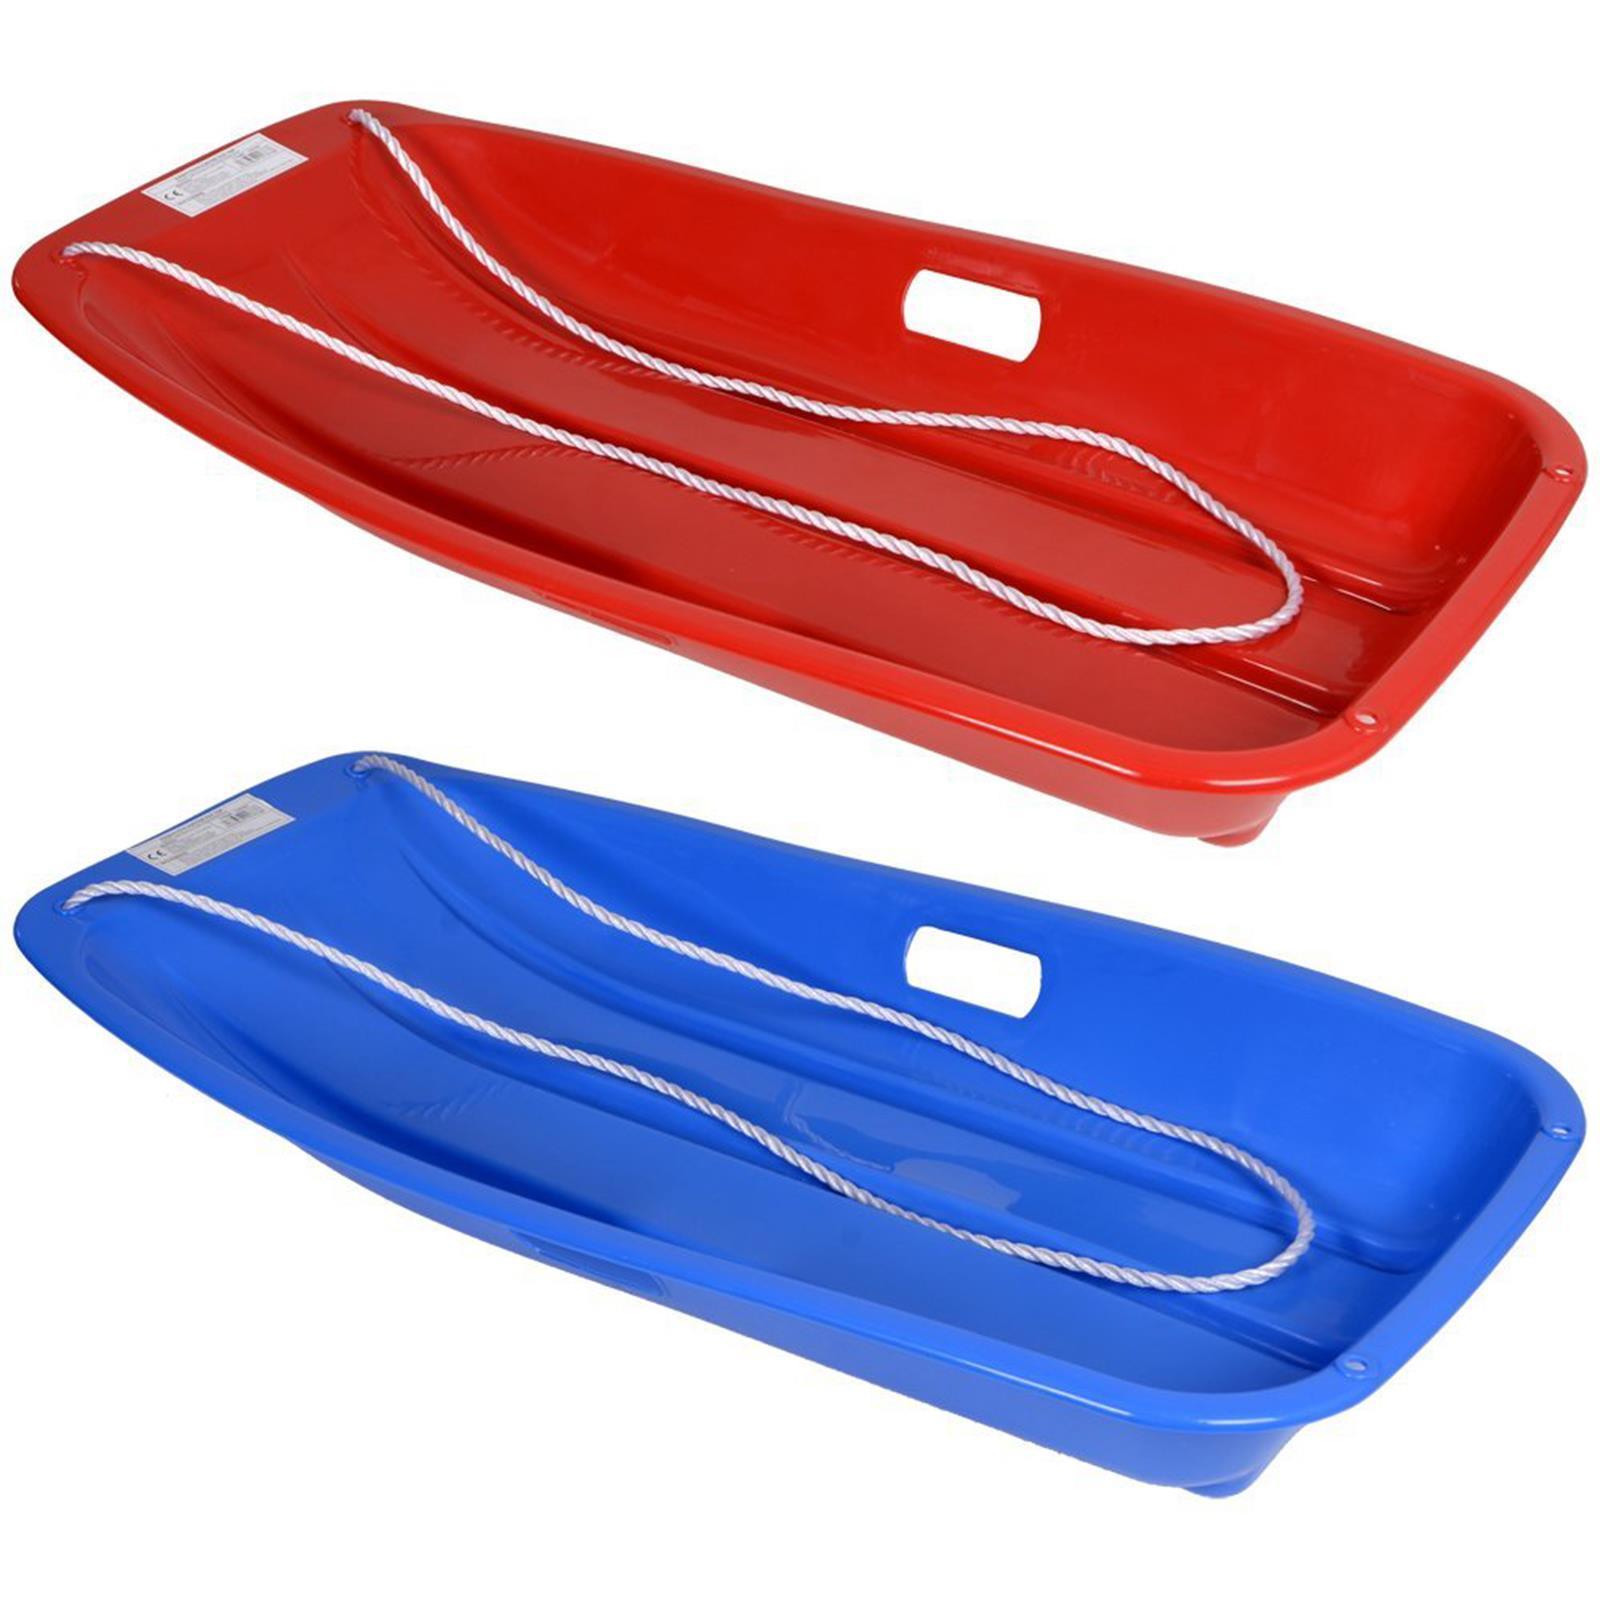 LARGE SLED PLASTIC SLEDGE WITH ROPE WINTER OUTDOOR SNOW KIDS TOBOGGAN 90CM NEW 